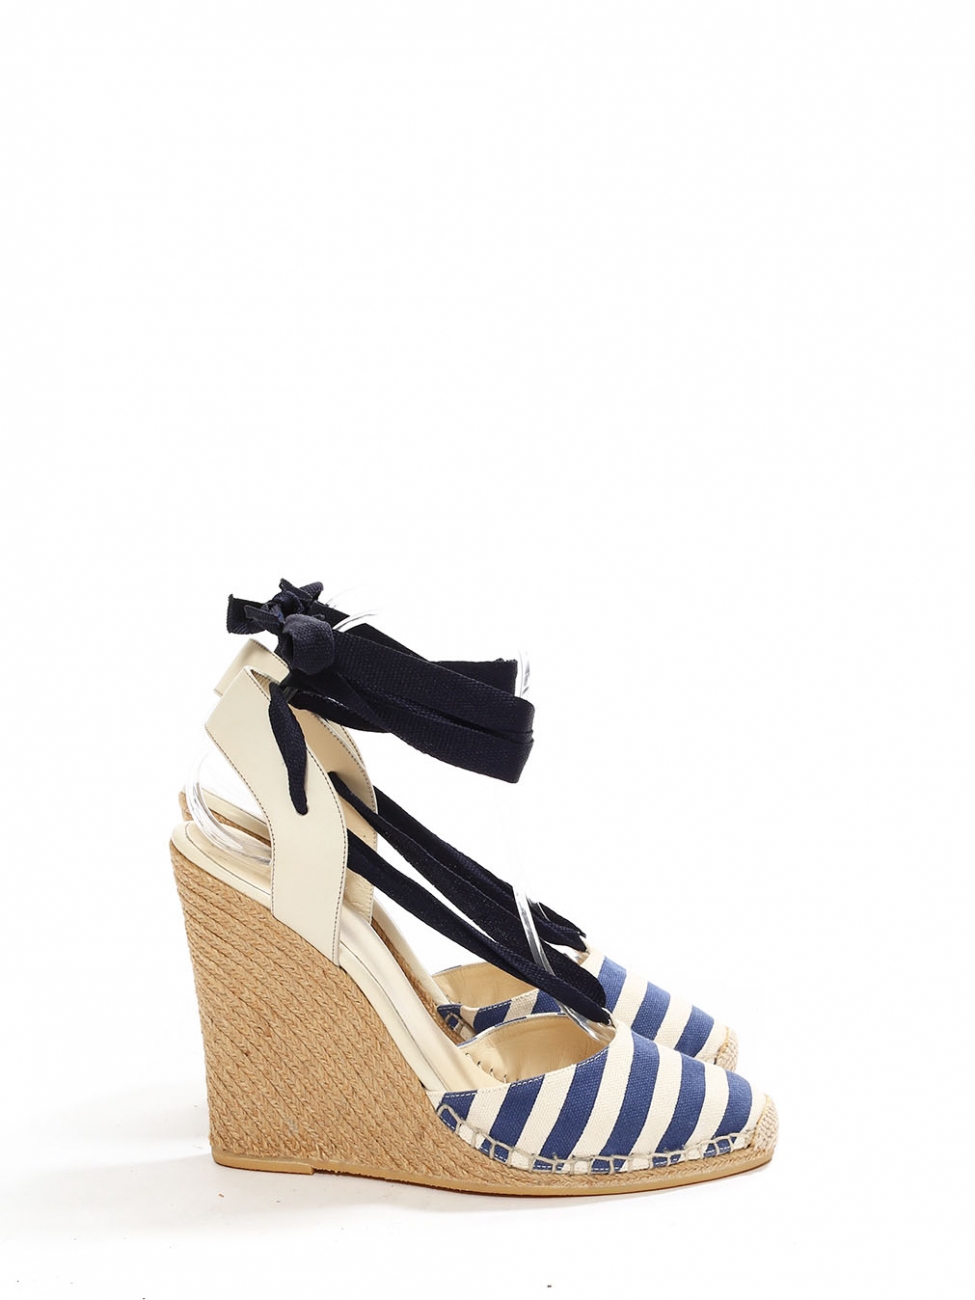 navy and white striped sandals